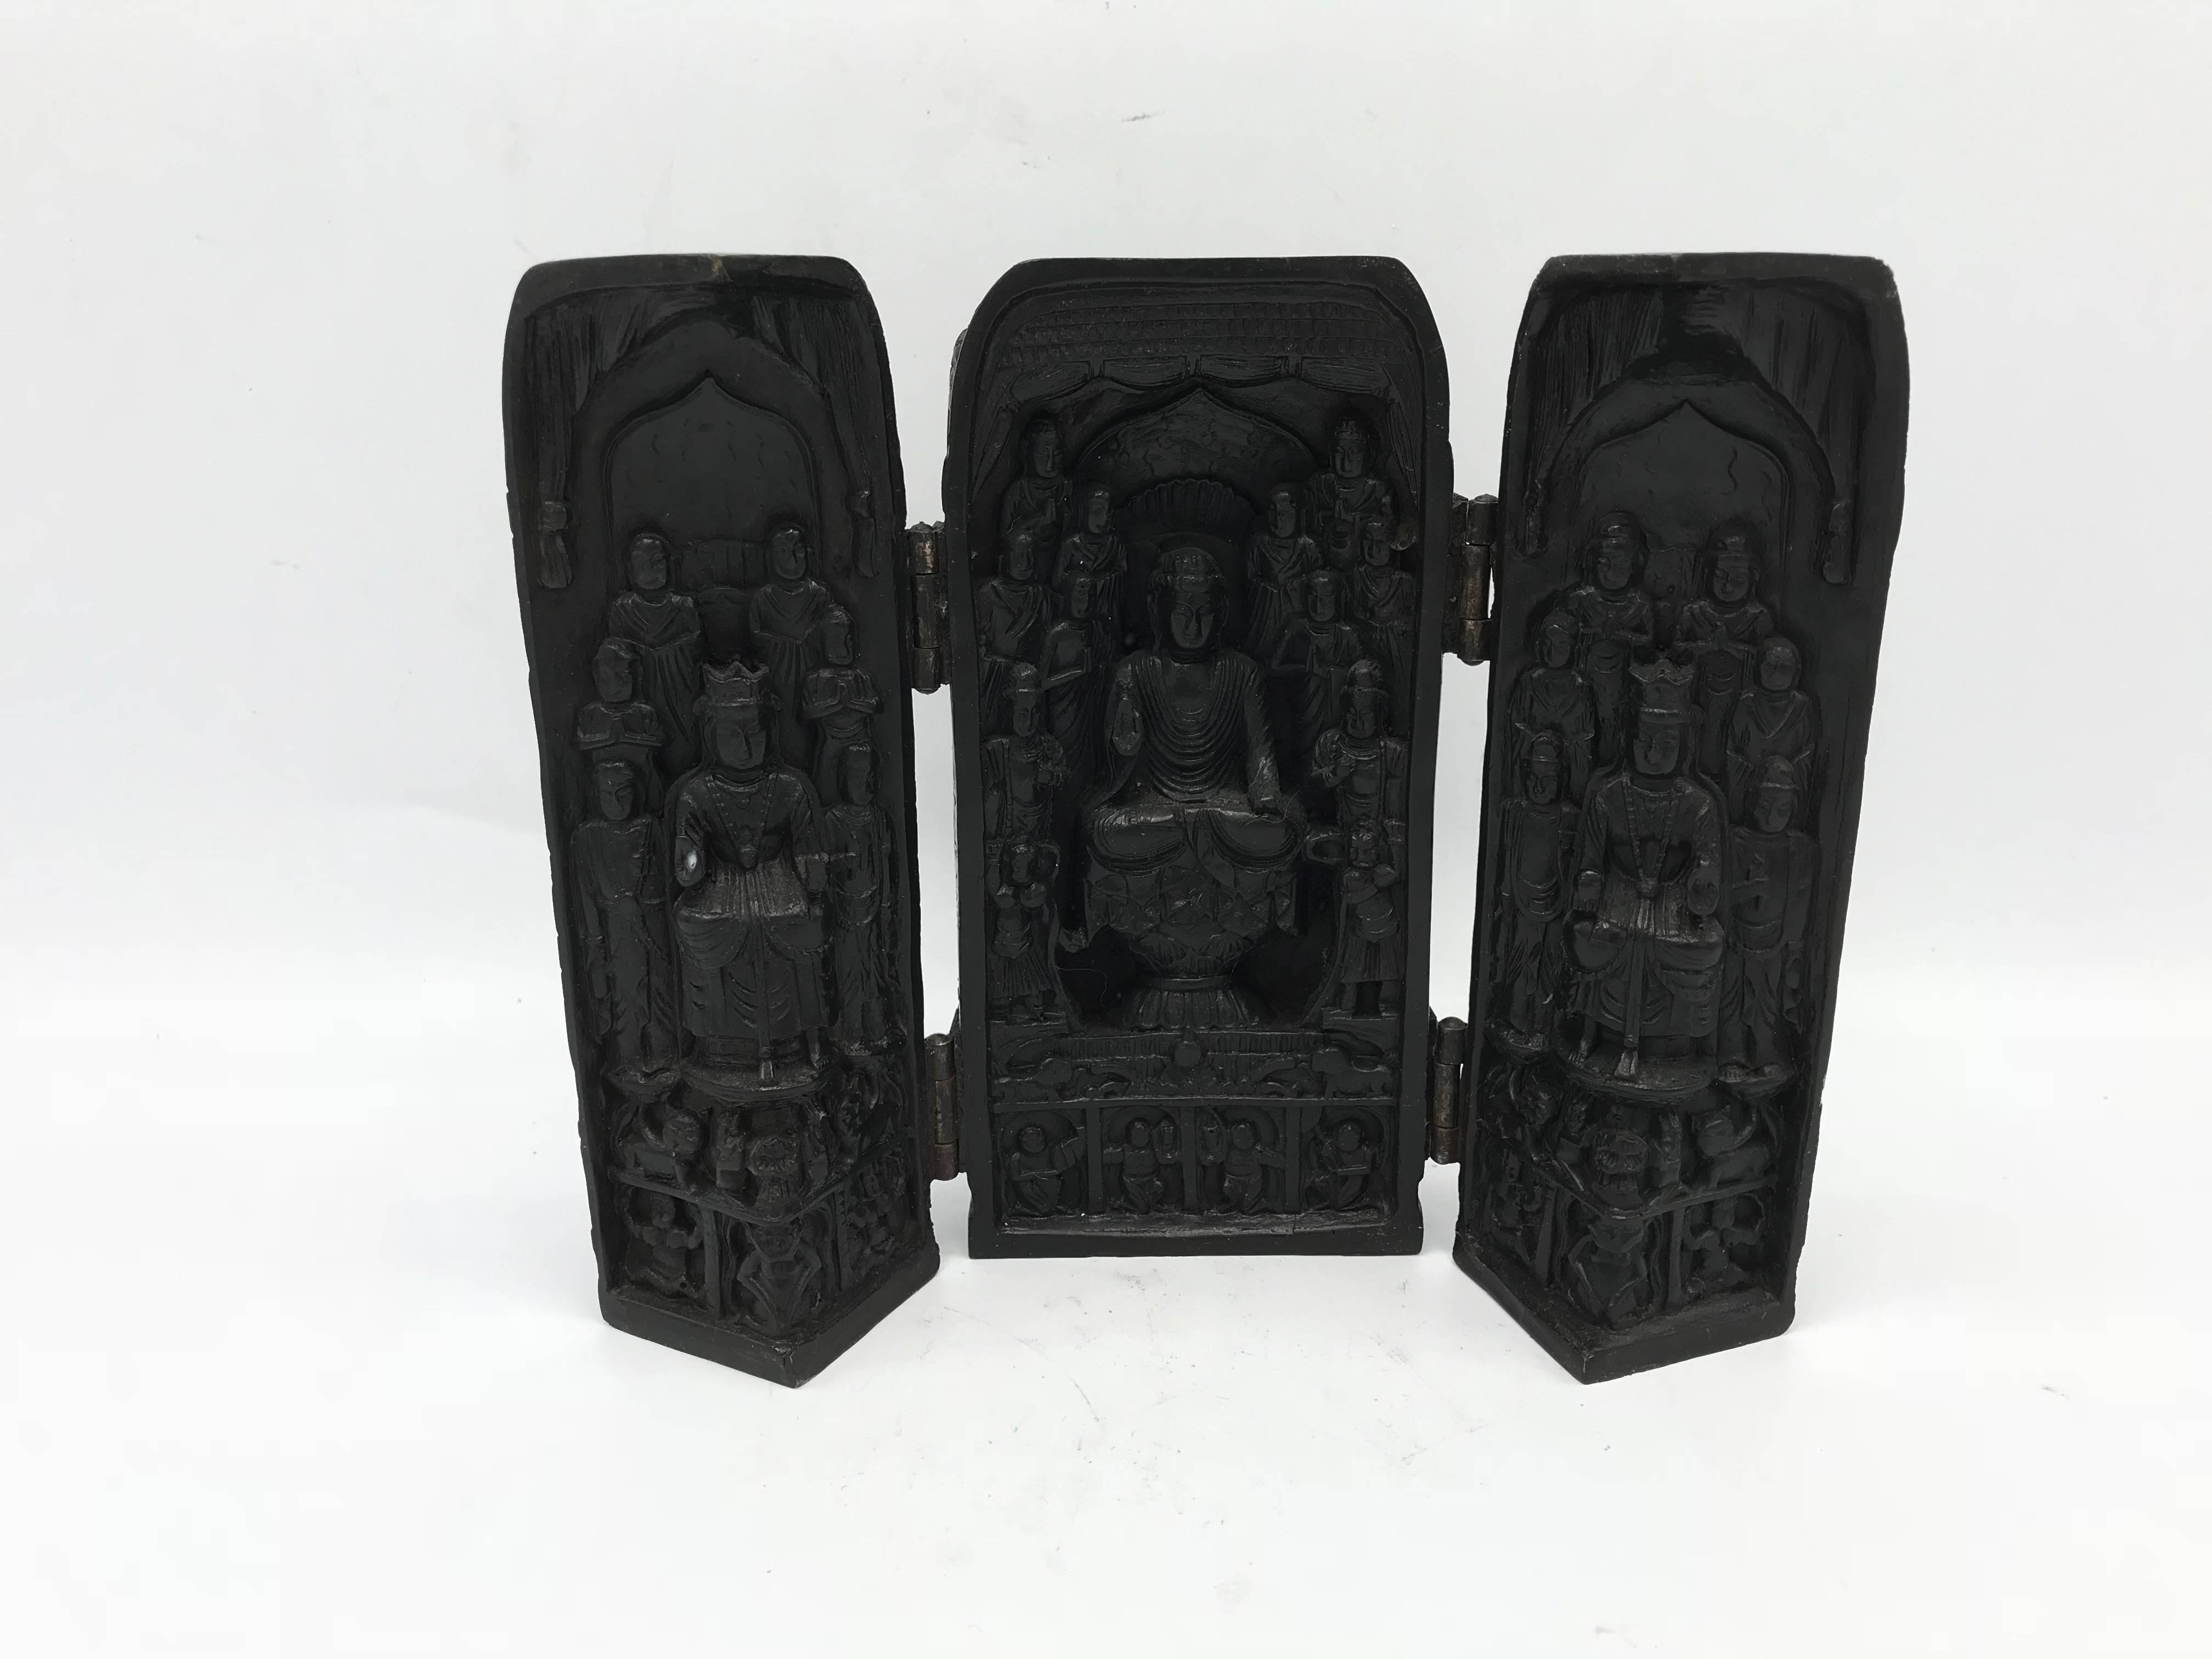 Offered is an exquisite, 1970s, Asian temple shrine sculpture. The piece is made of solid, carved resin with a trifold hinged front. Hinges all work smoothly. When shut, it resembles a decorative box.
Measures:
When closed: 3.25